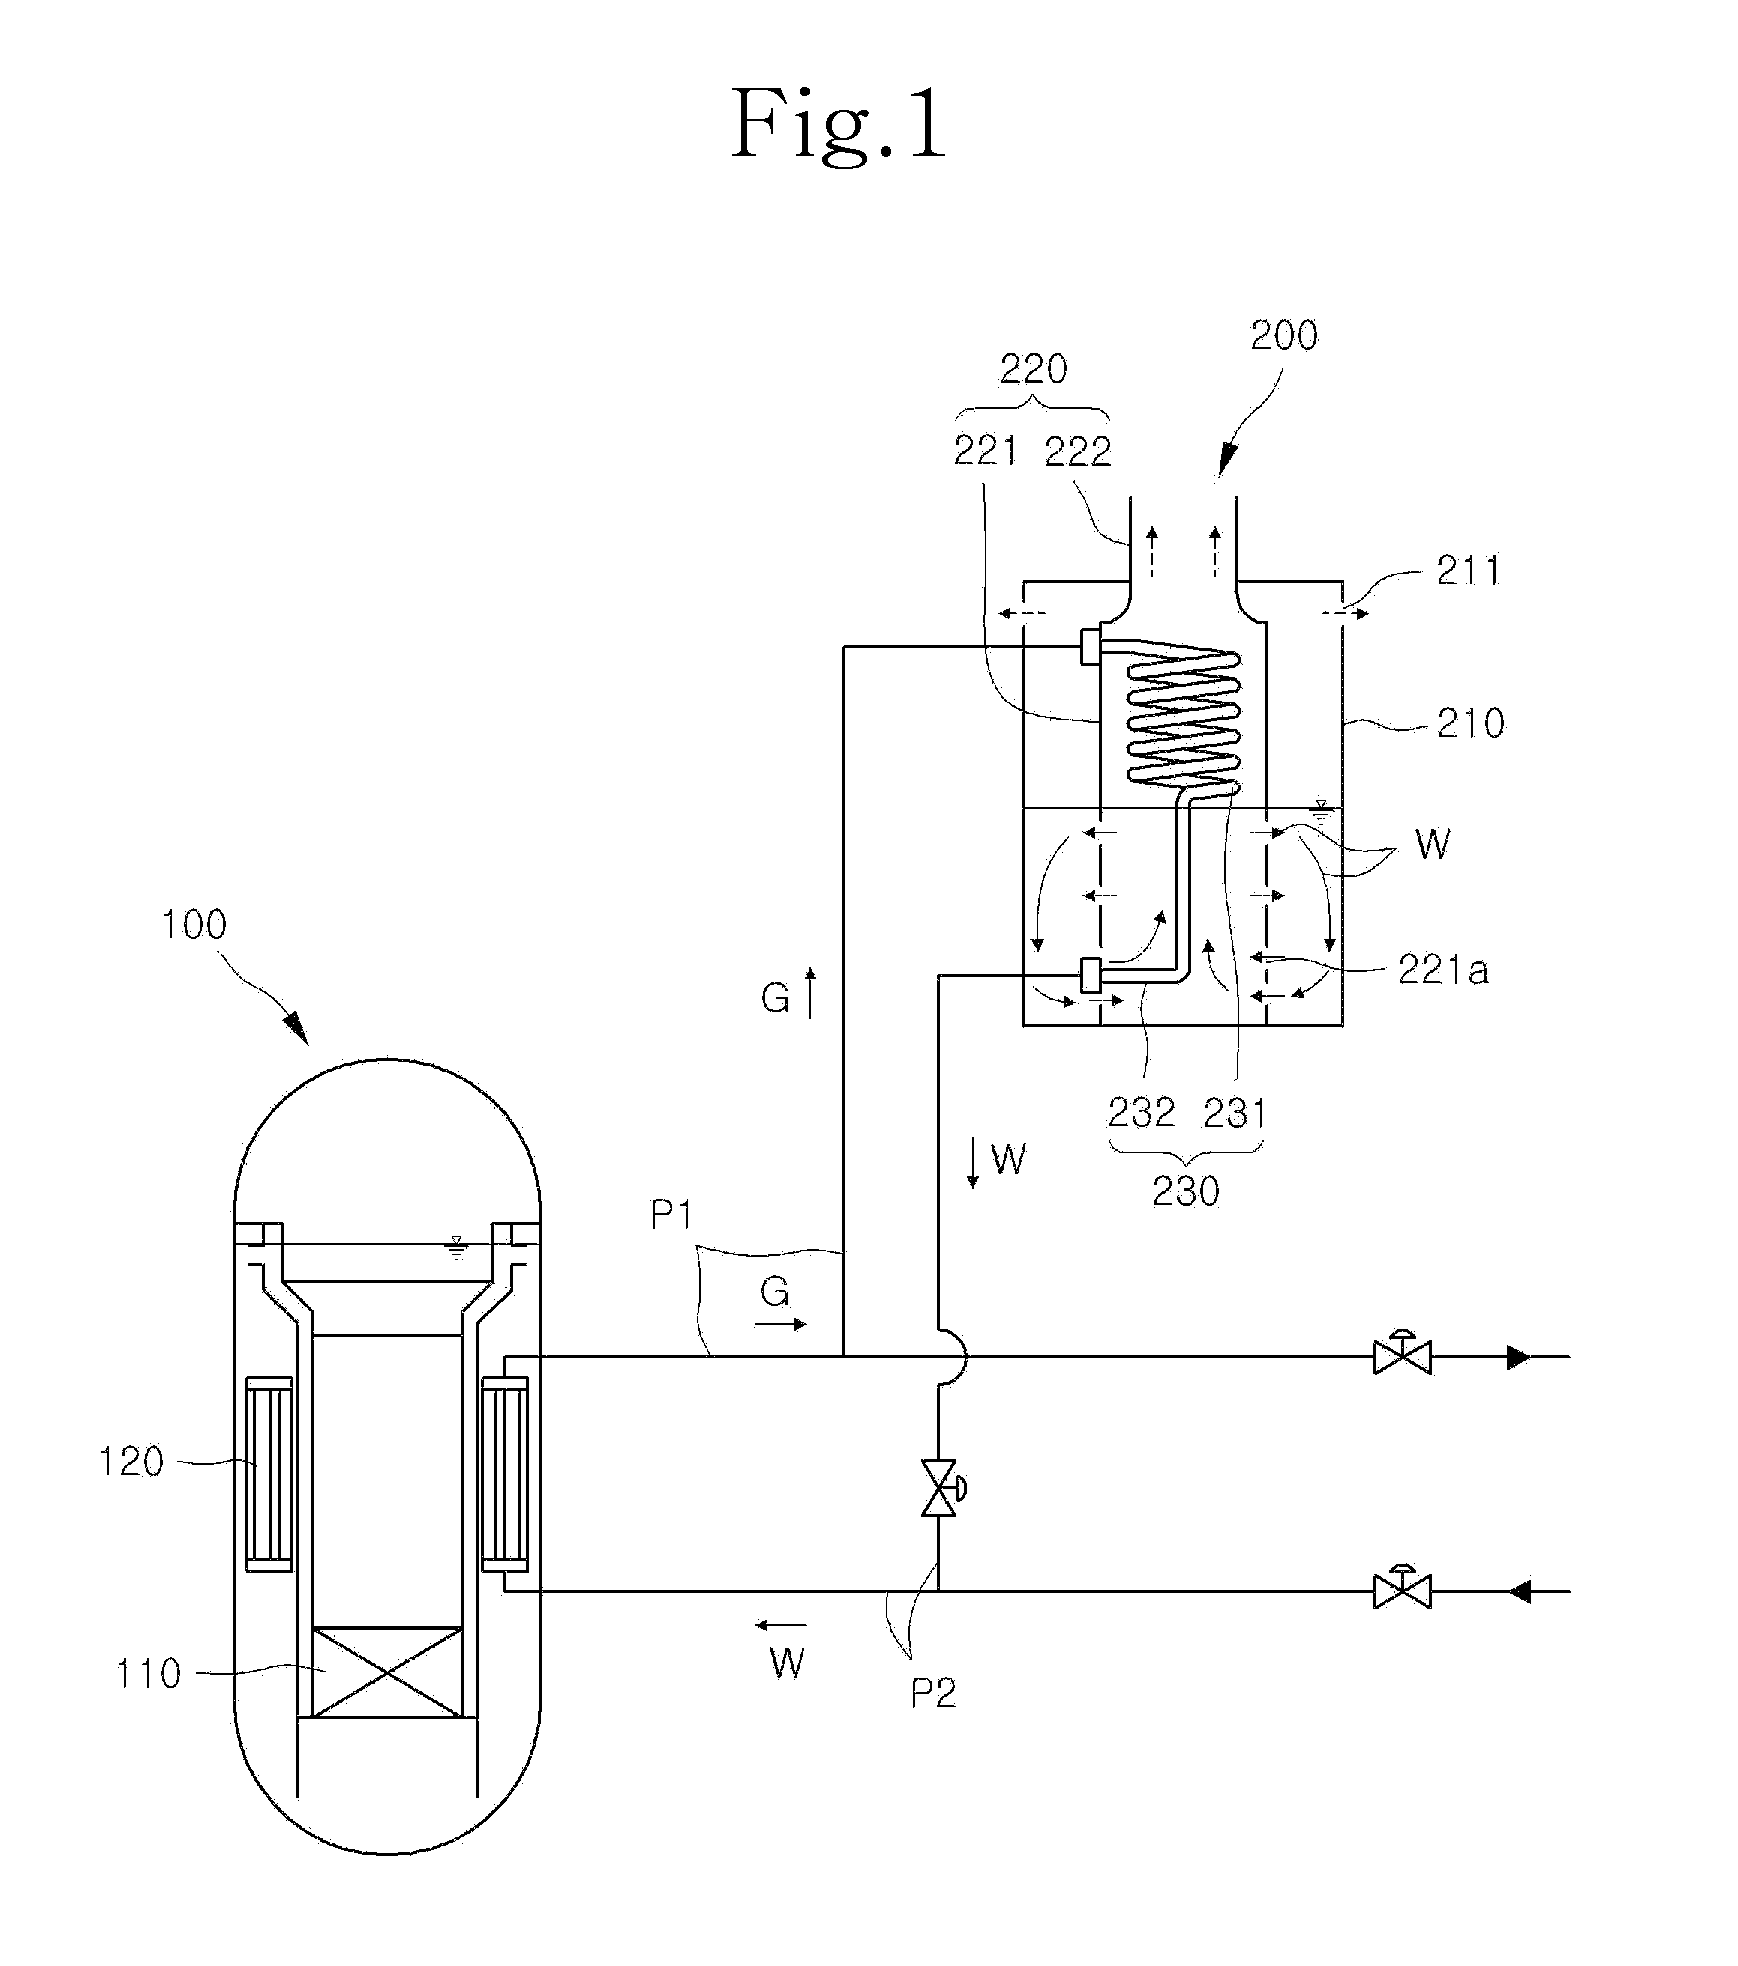 Heat exchanger for passive residual heat removal system